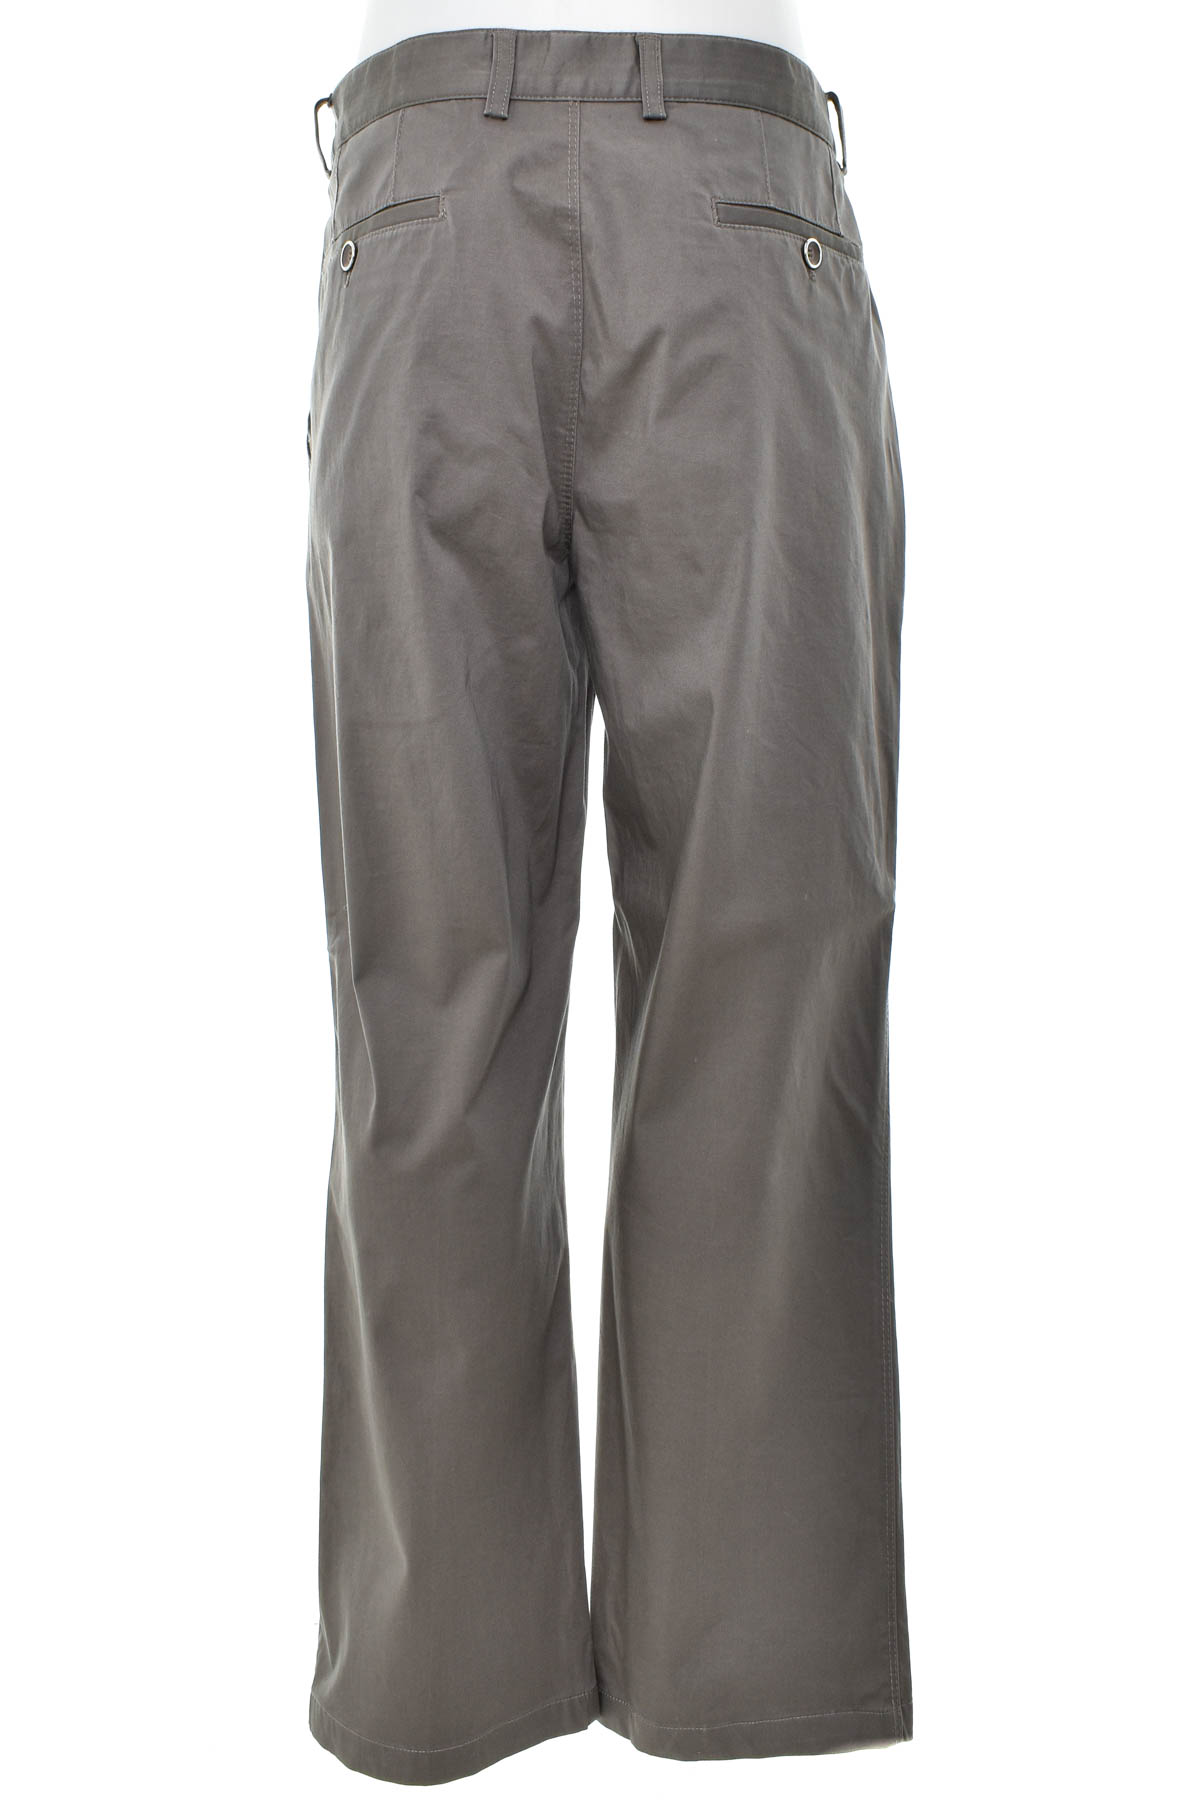 Men's trousers - Theorie - 1